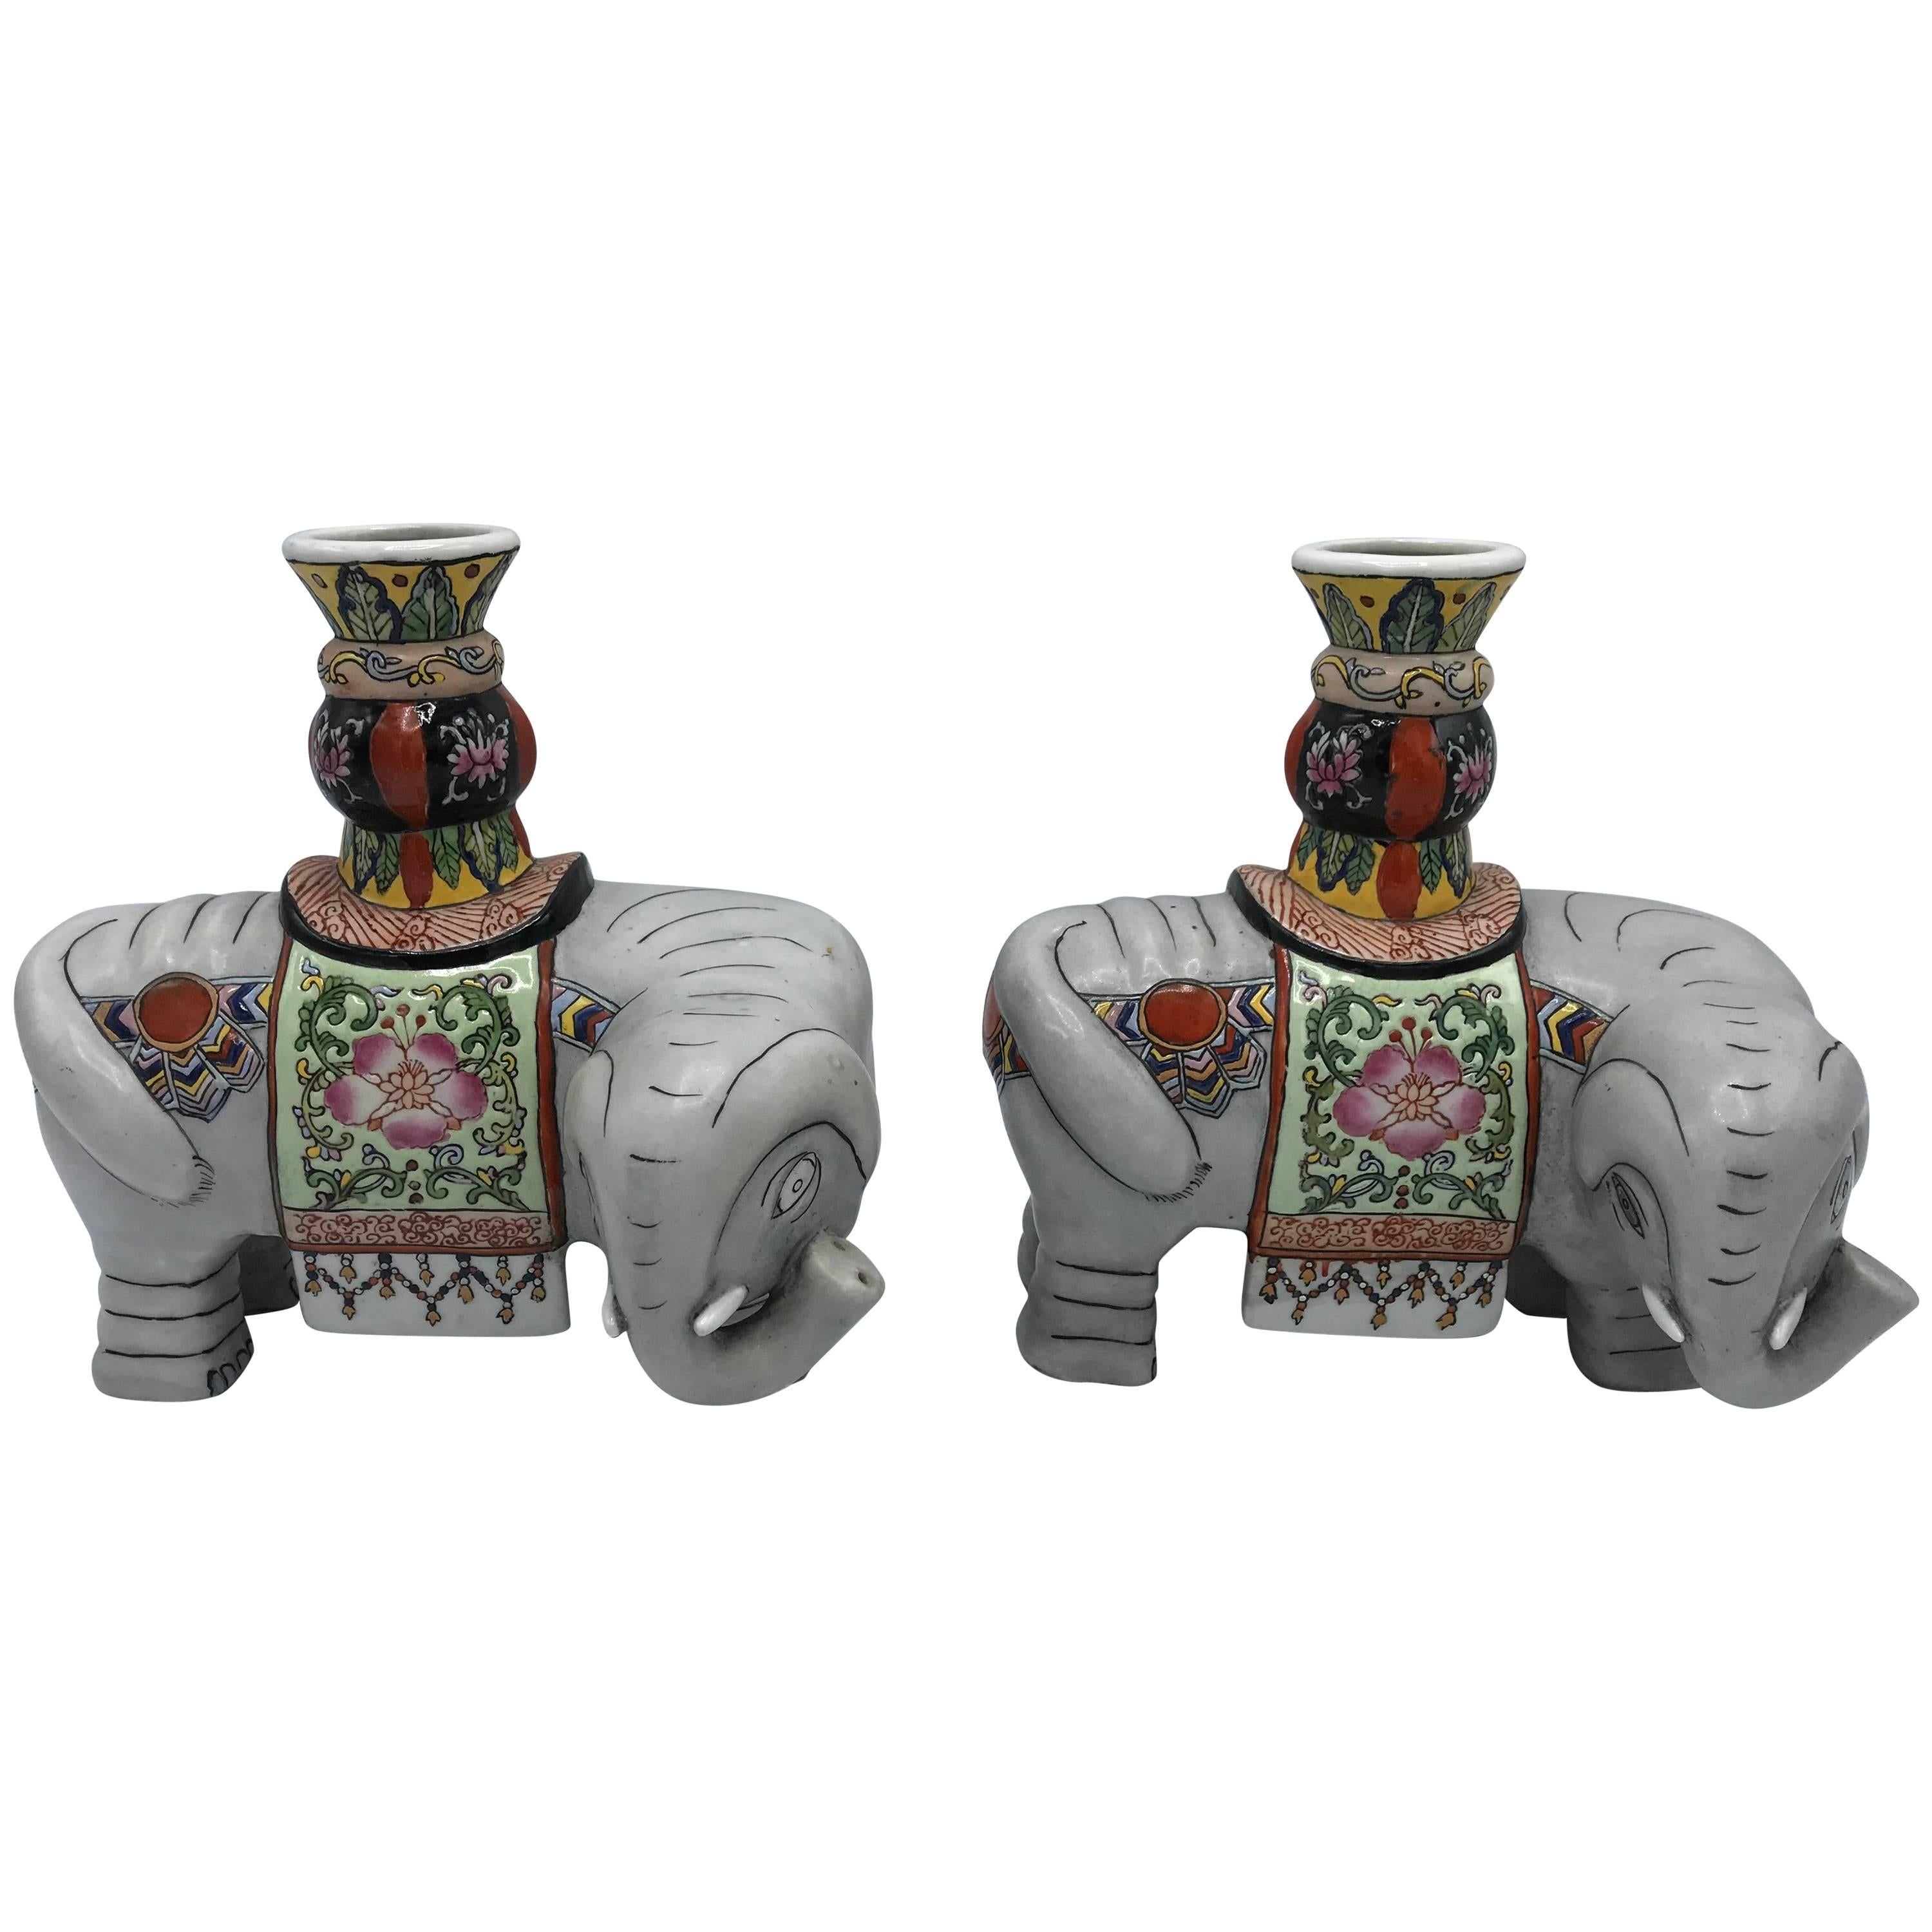 1960s Polychrome Ceramic Elephant Sculpture Candlestick Holders, Pair For Sale